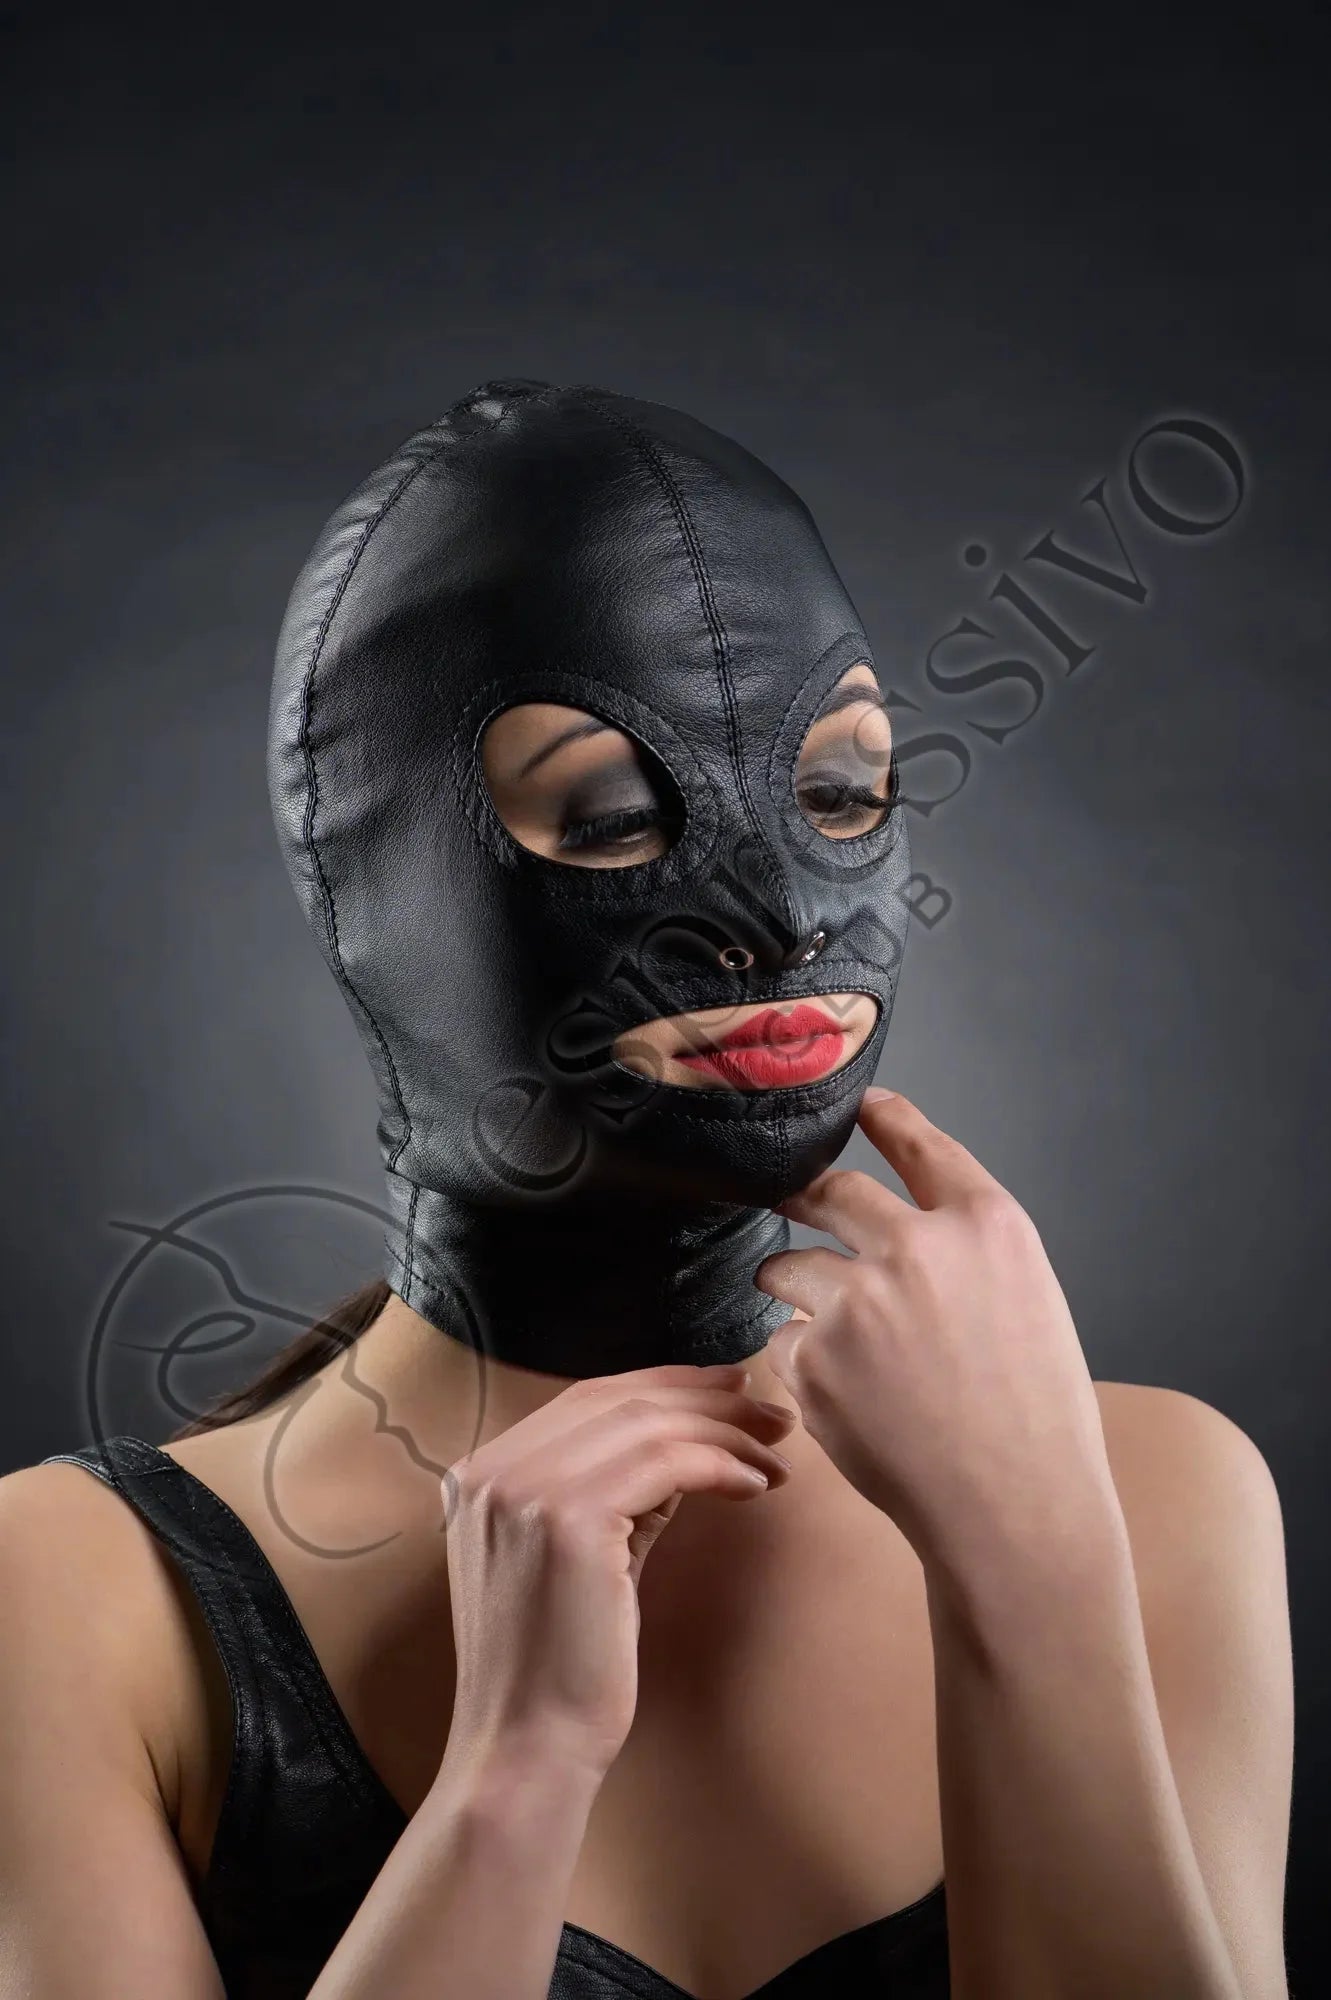 Tight Leather BDSM Hood - Open Eyes & Mouth - Female Model Front